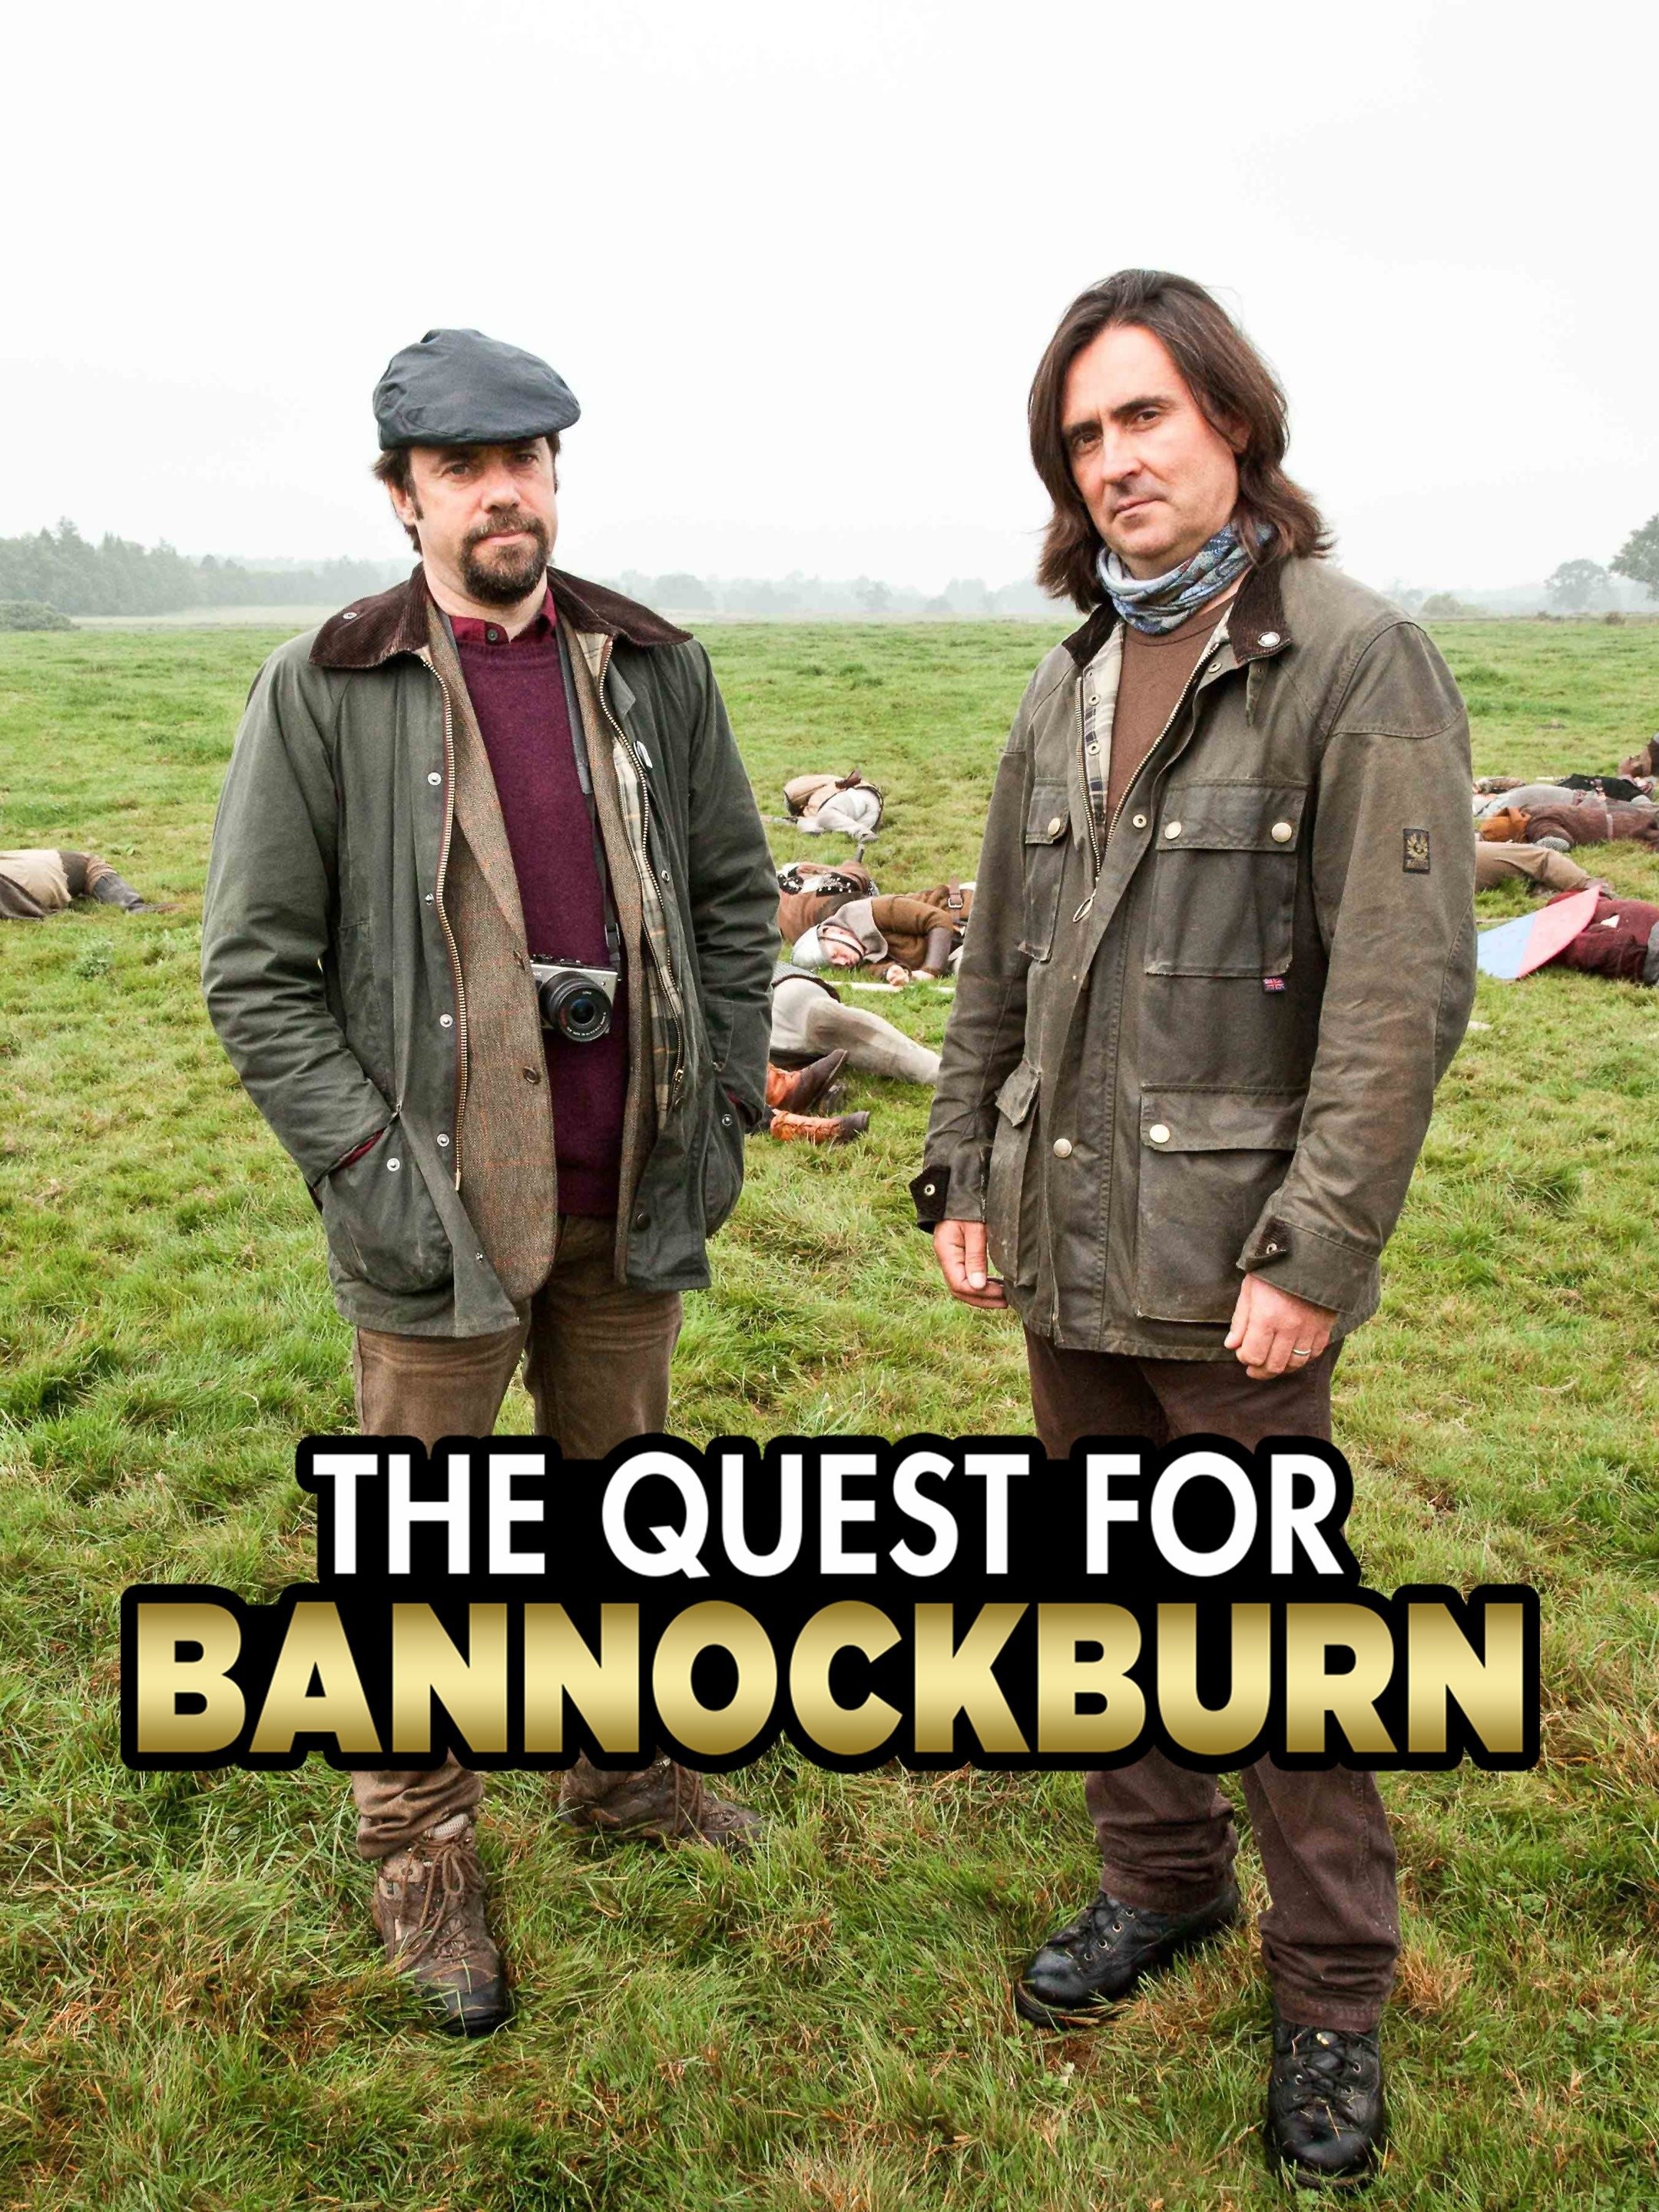 The Quest for Bannockburn Pictures - Rotten Tomatoes